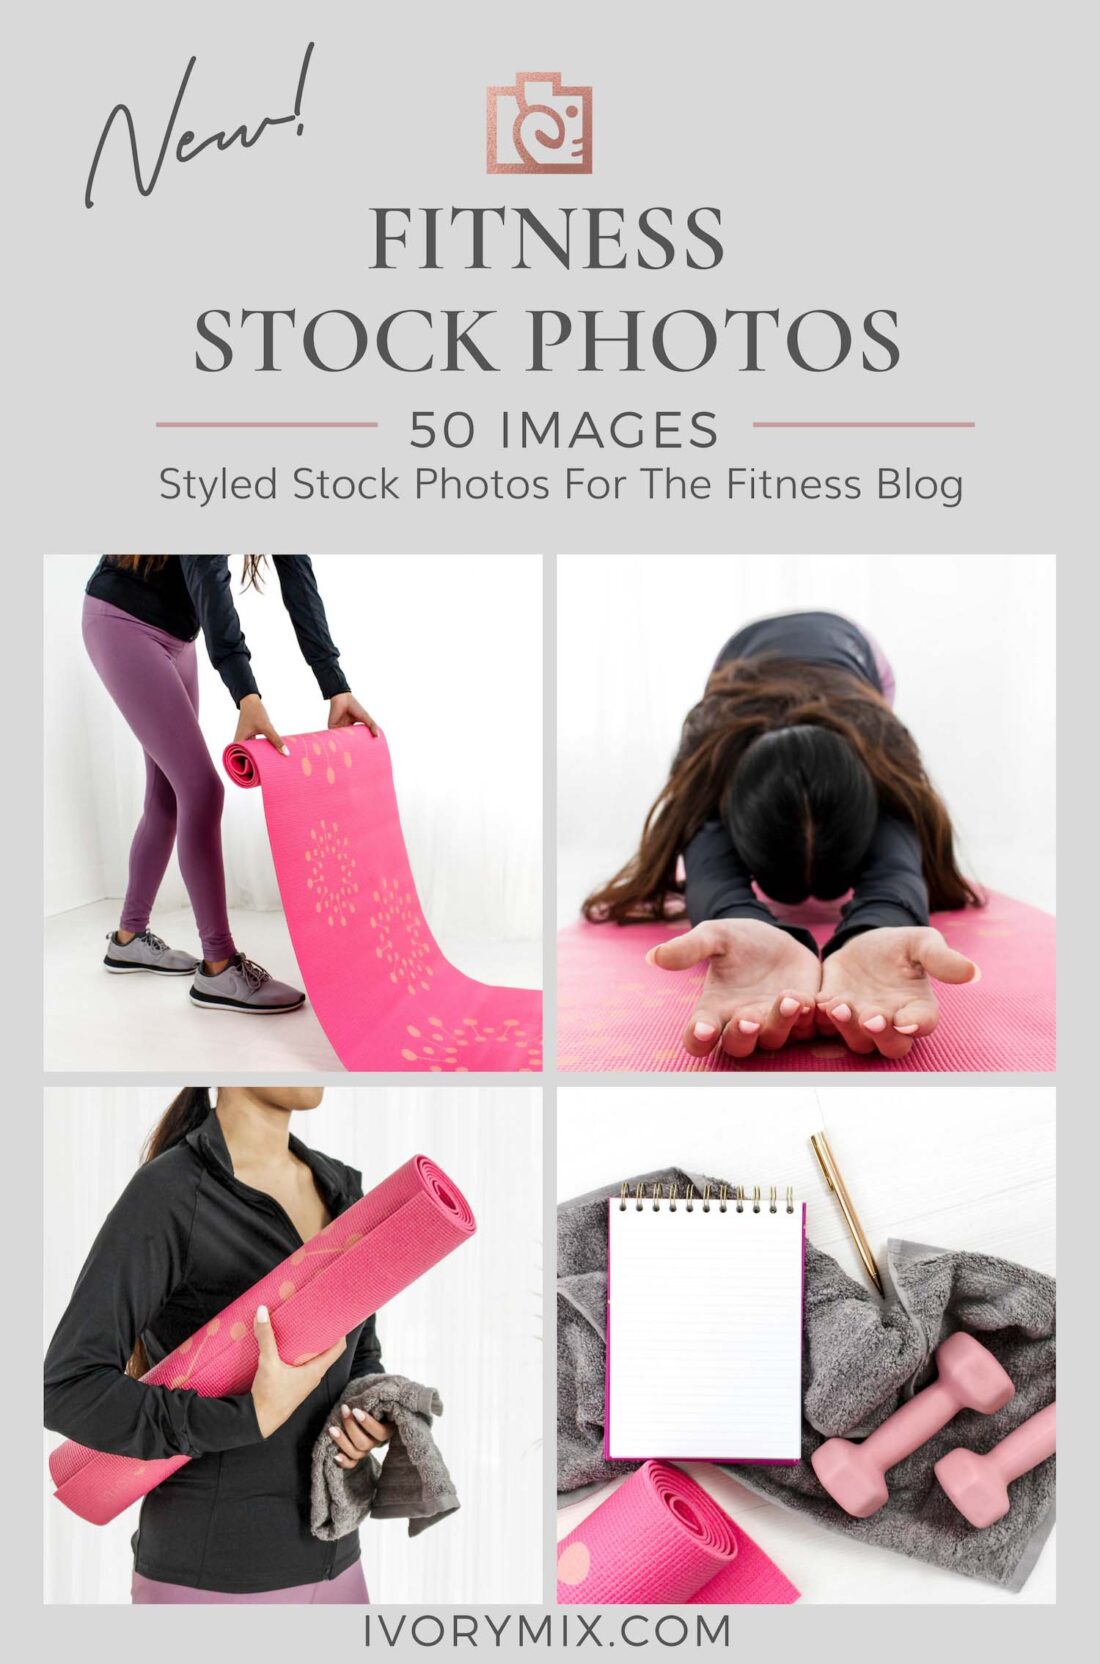 Fitness yoga stock photos from Ivory Mix